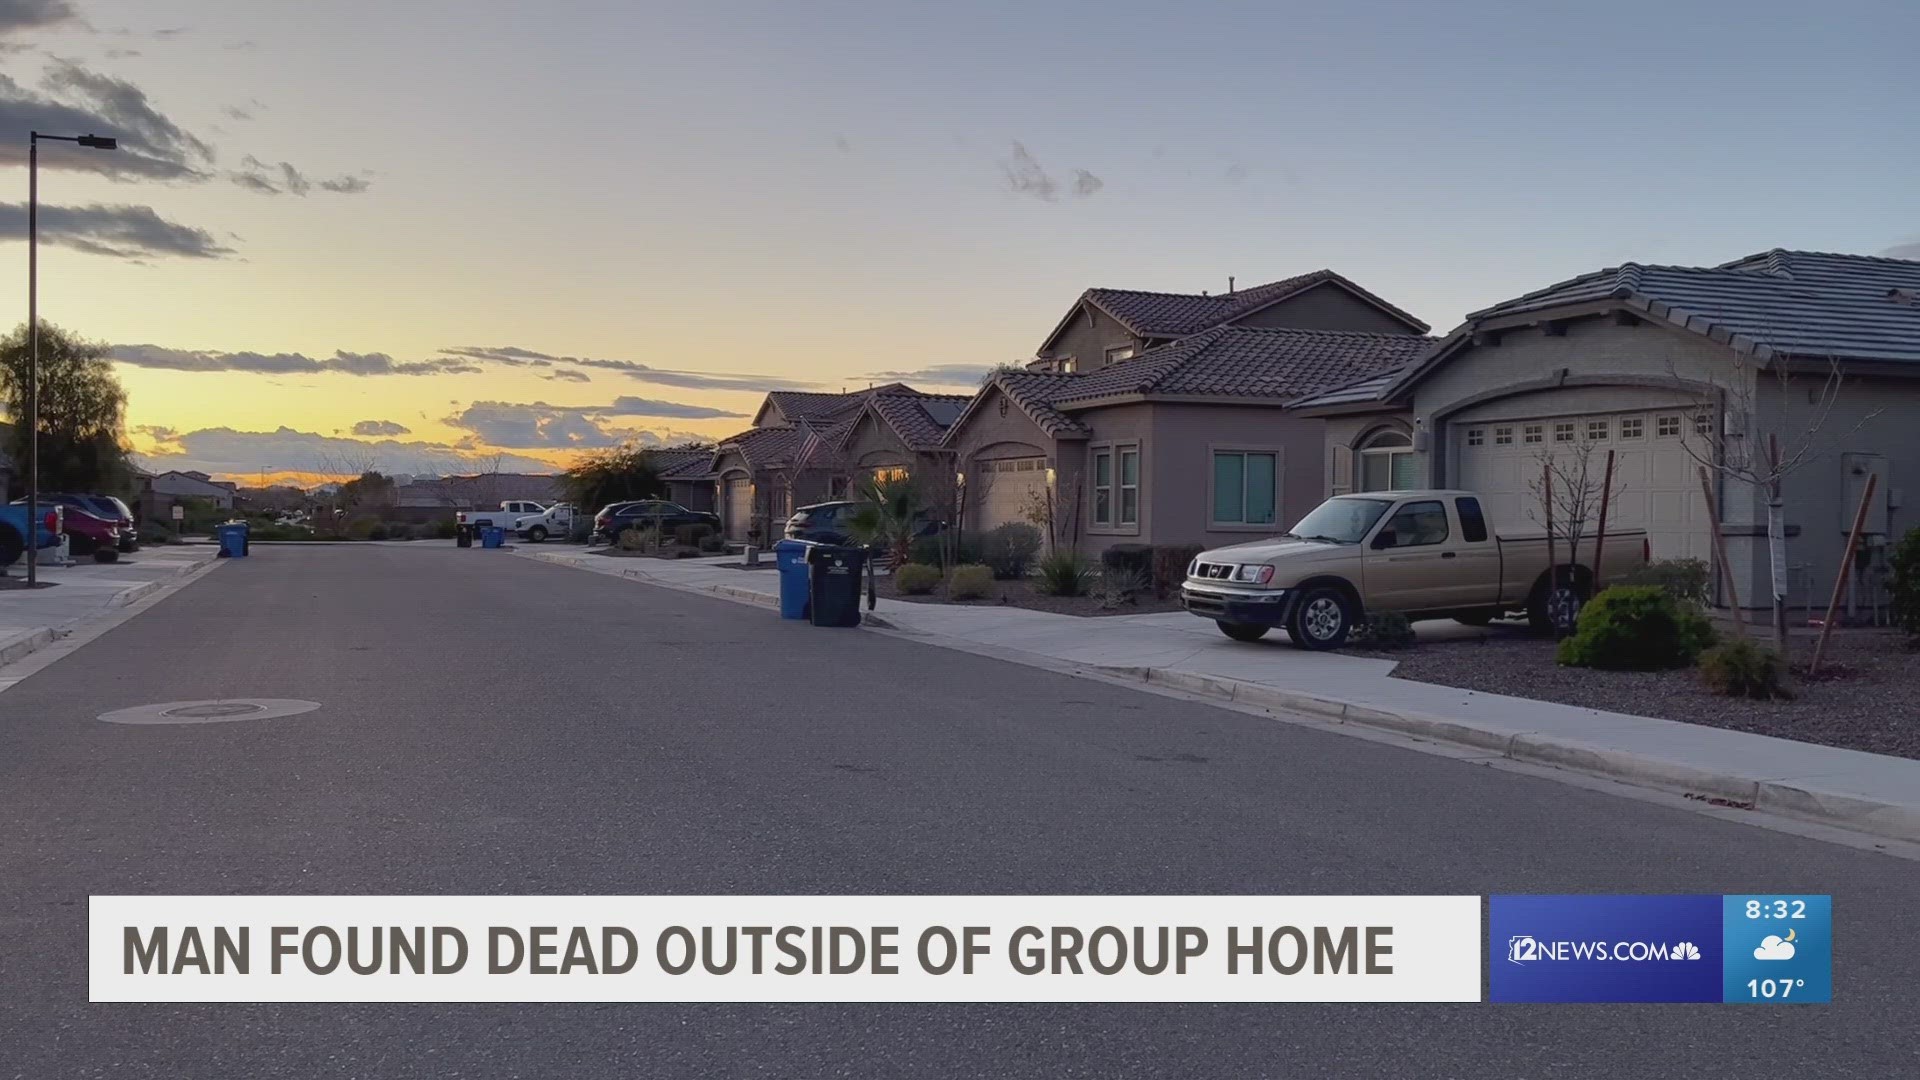 A neighbor said she was walking her dog when she found the man's body lying on the sidewalk.